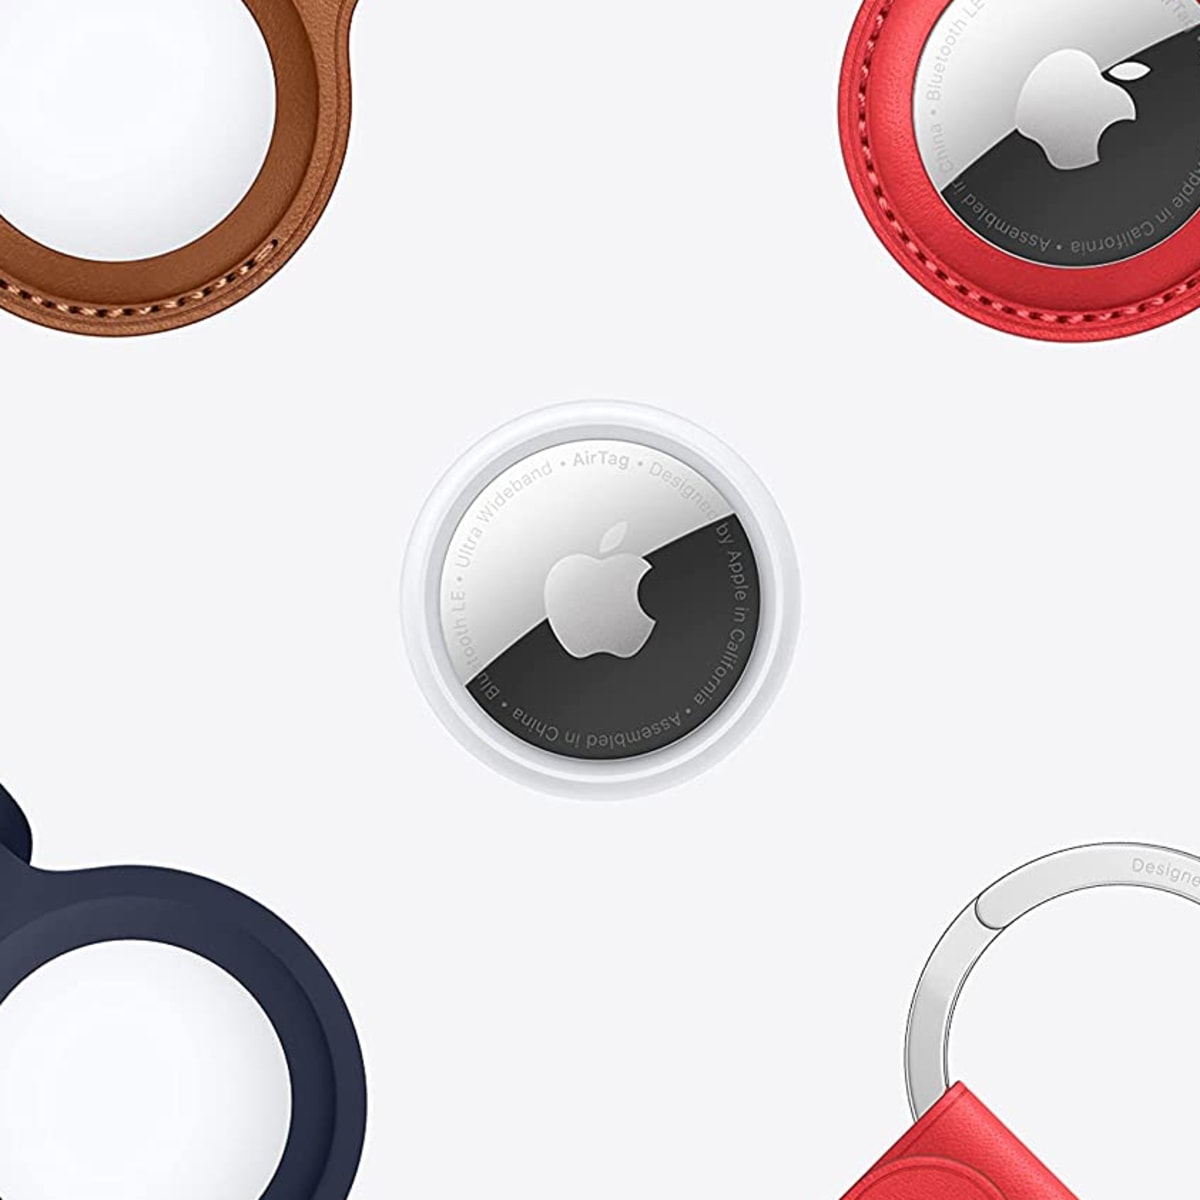 Apple AirTags Are on Sale for Just $27